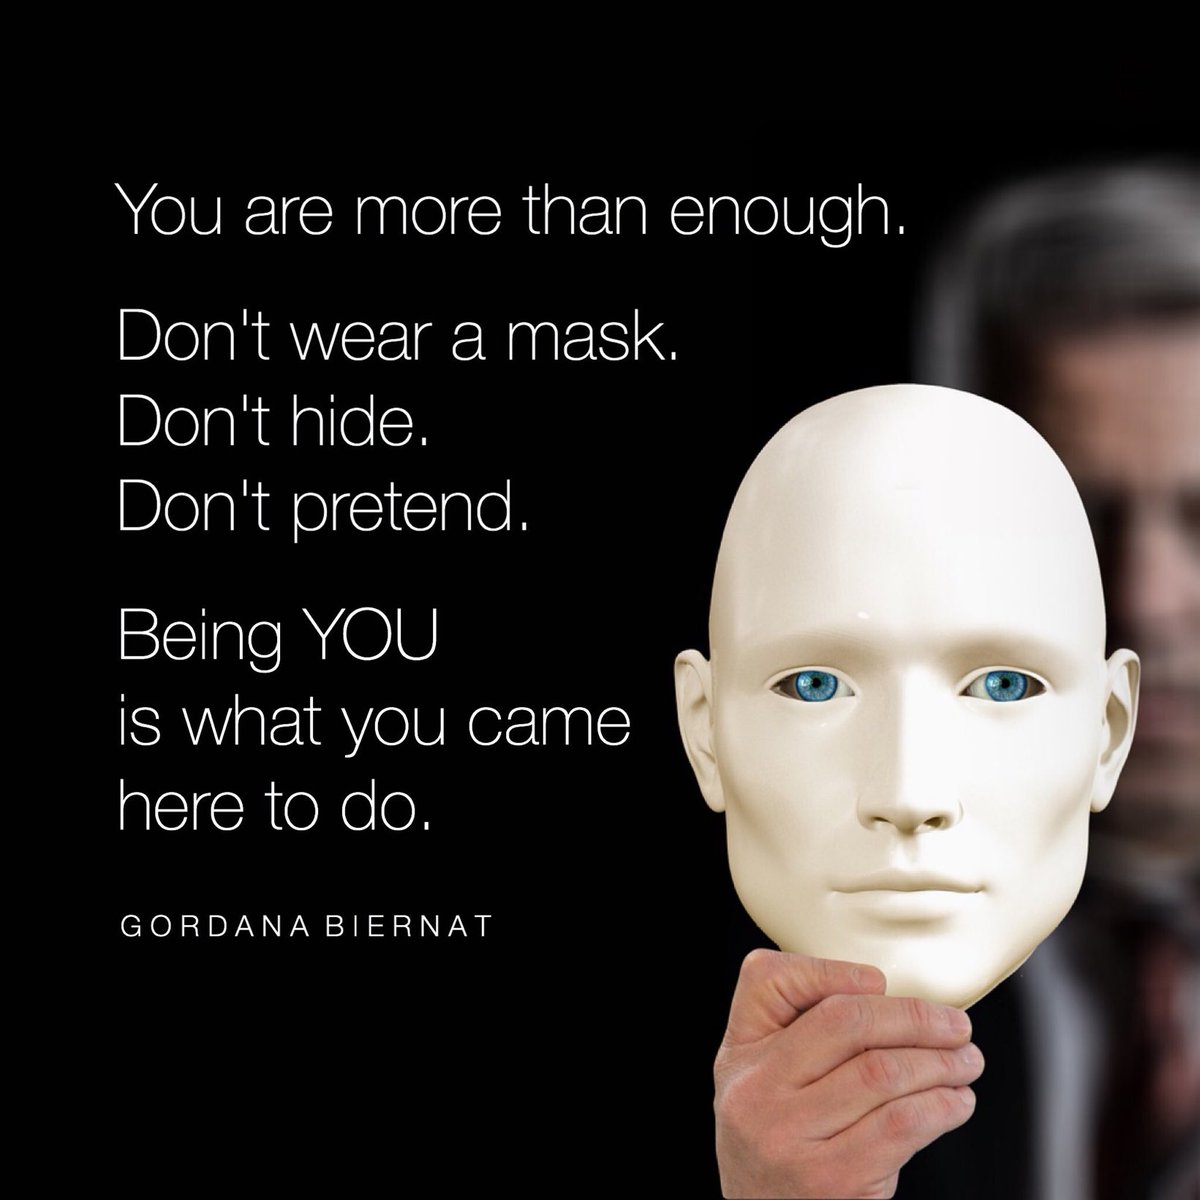 YOU are more than enough. Don't wear a mask. Don't hide. Don't pretend. Being YOU is what you came here to do. ♥️ #ShineOn✨ #FridayFeeling #FridayVibes